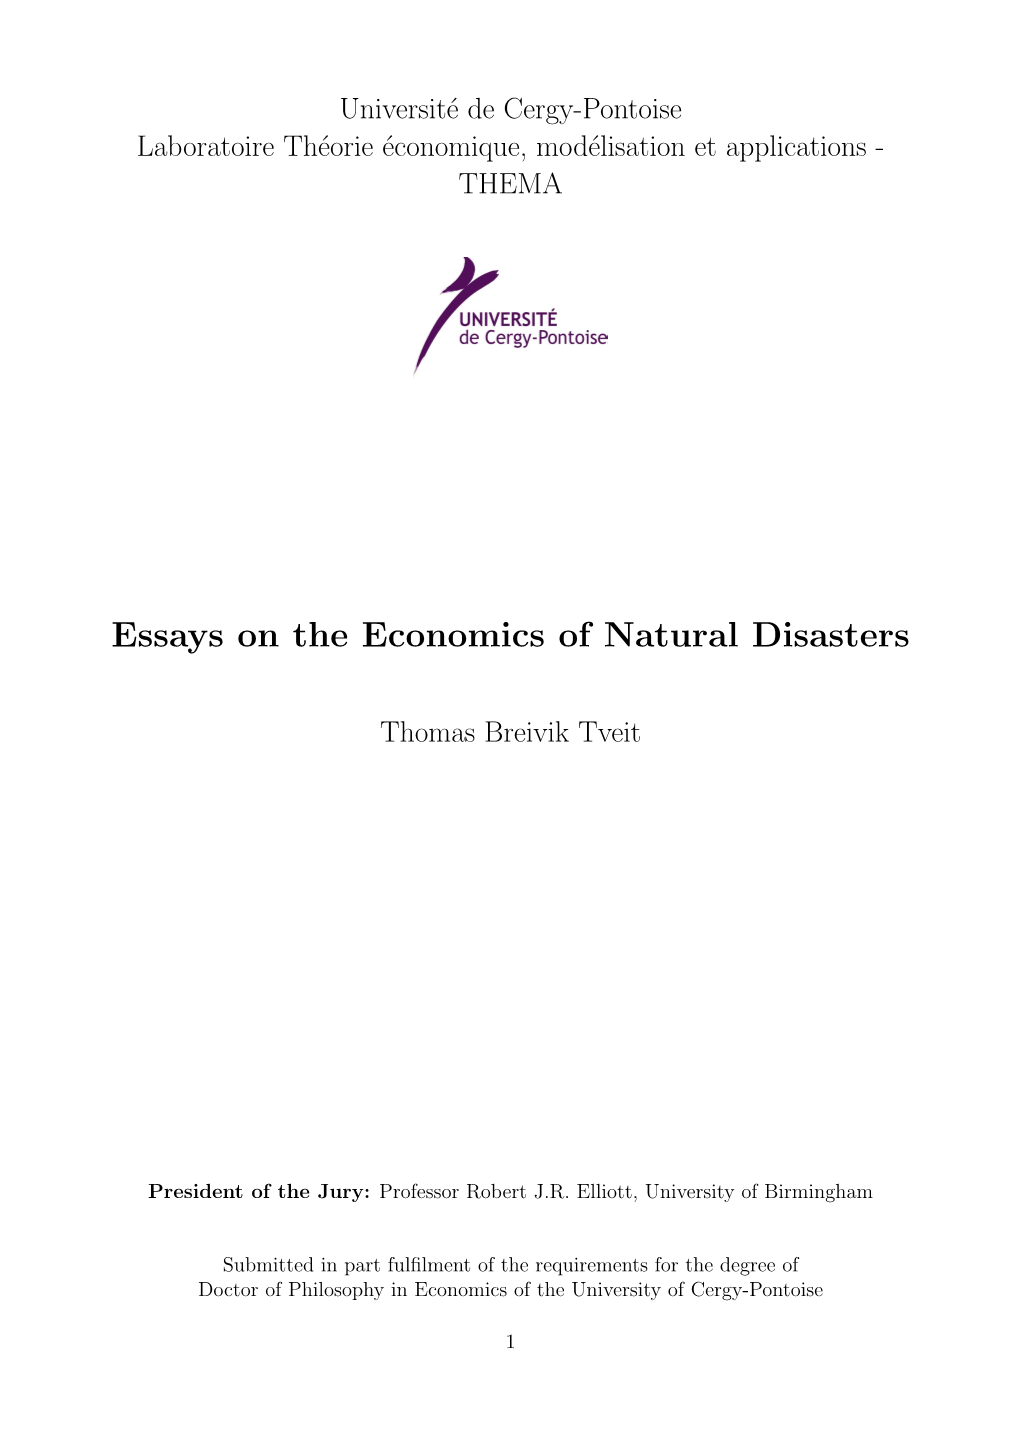 Essays on the Economics of Natural Disasters